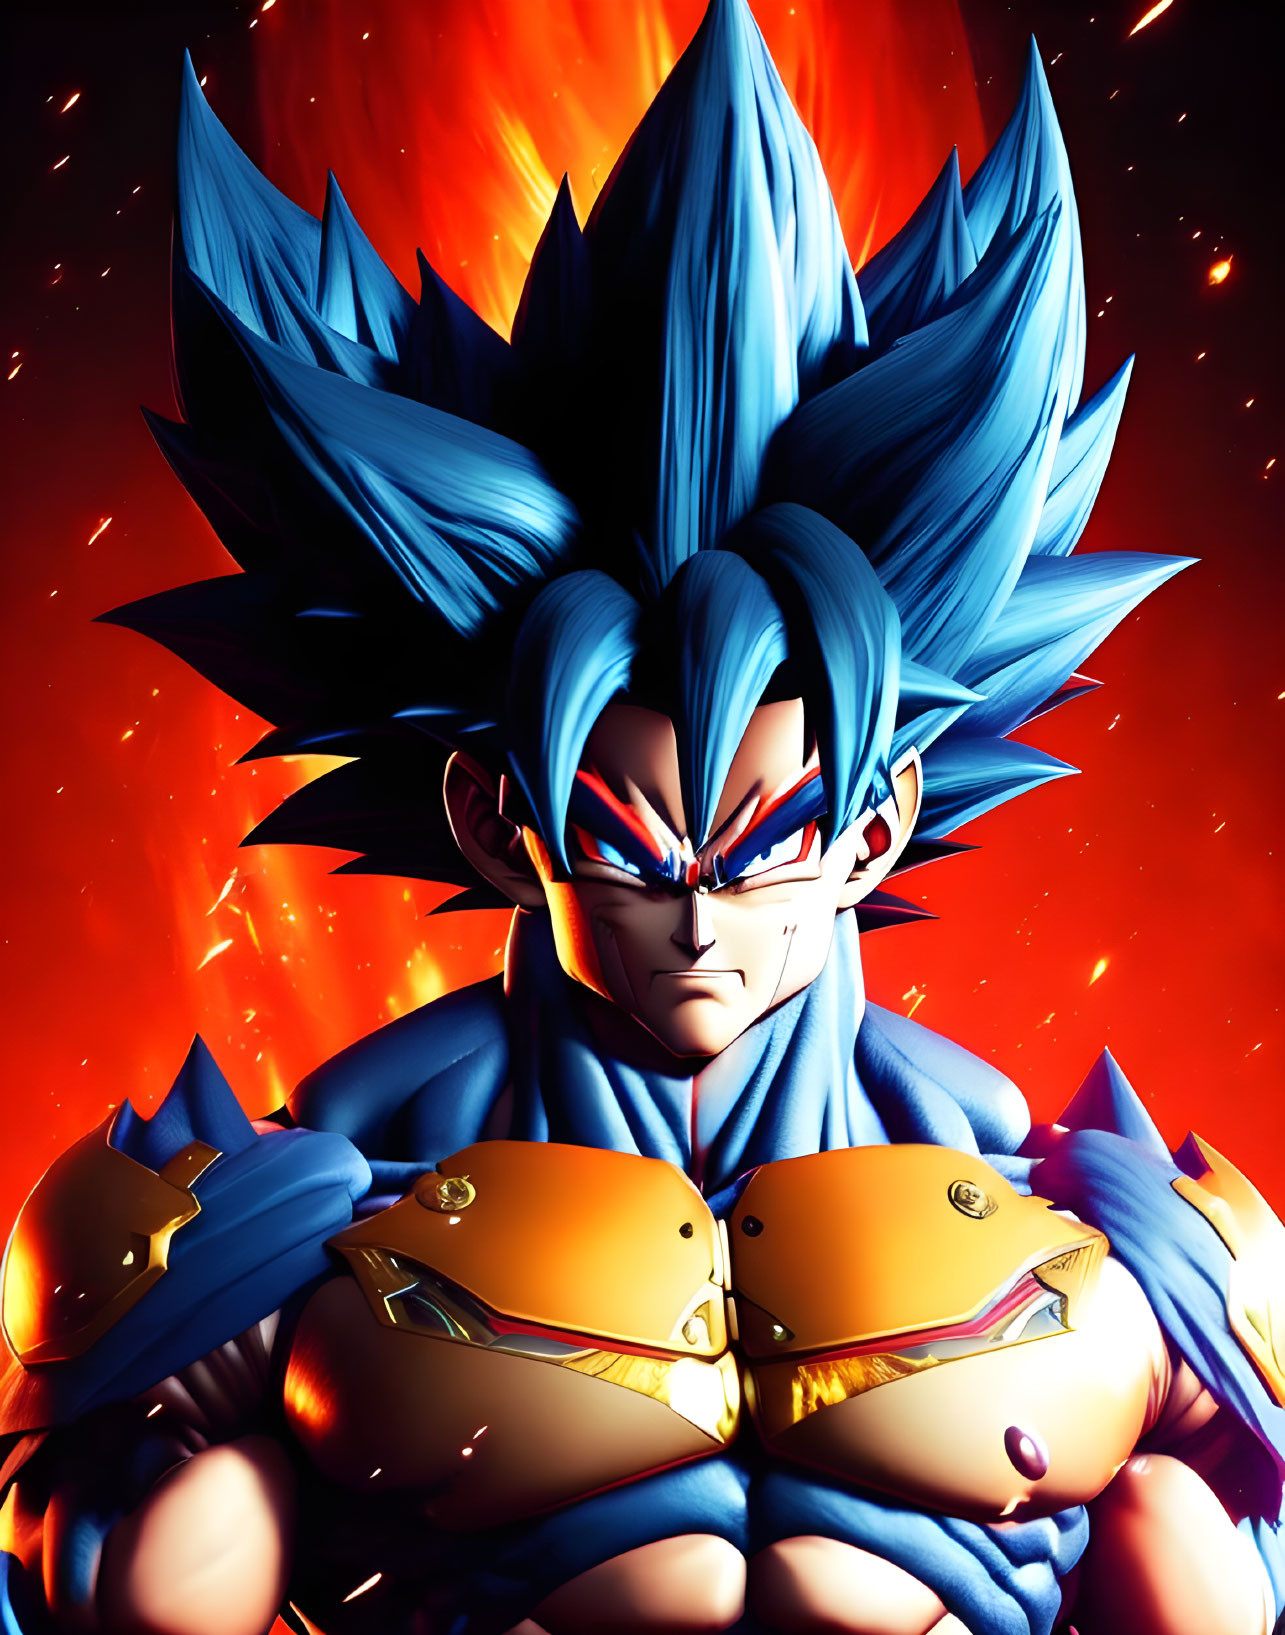 Anime character with spiky blue hair and red eyes in battle suit on fiery backdrop